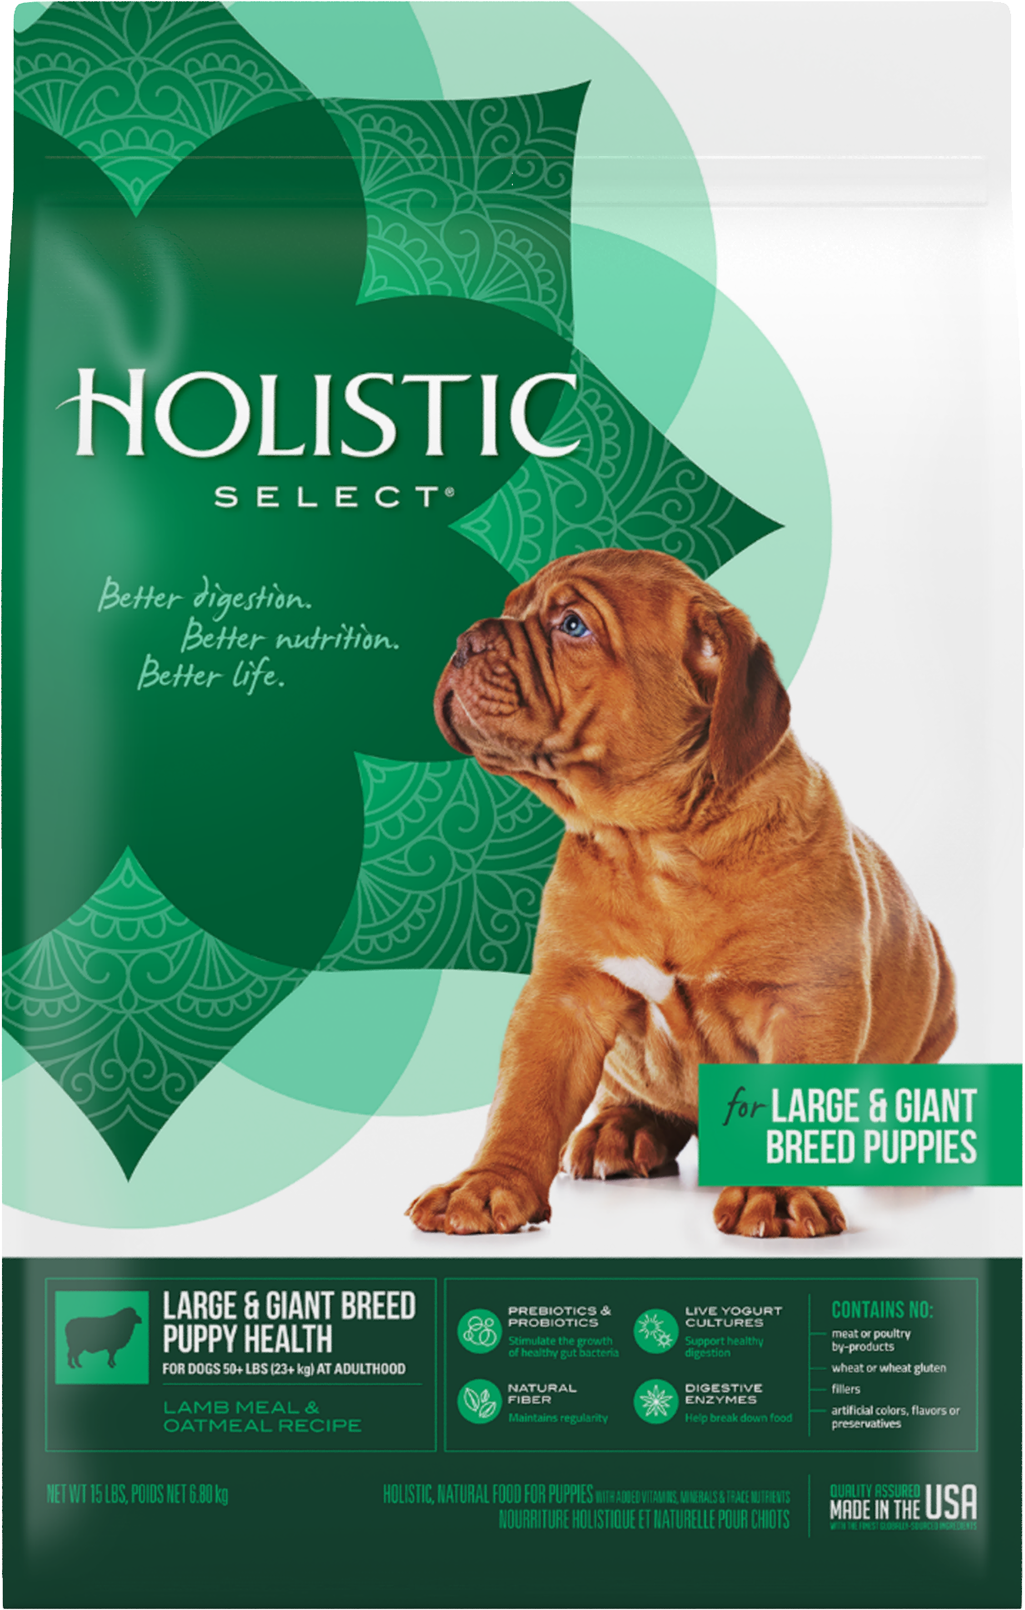 Large & Giant Breed Puppy Health product packaging image thumbnail 2